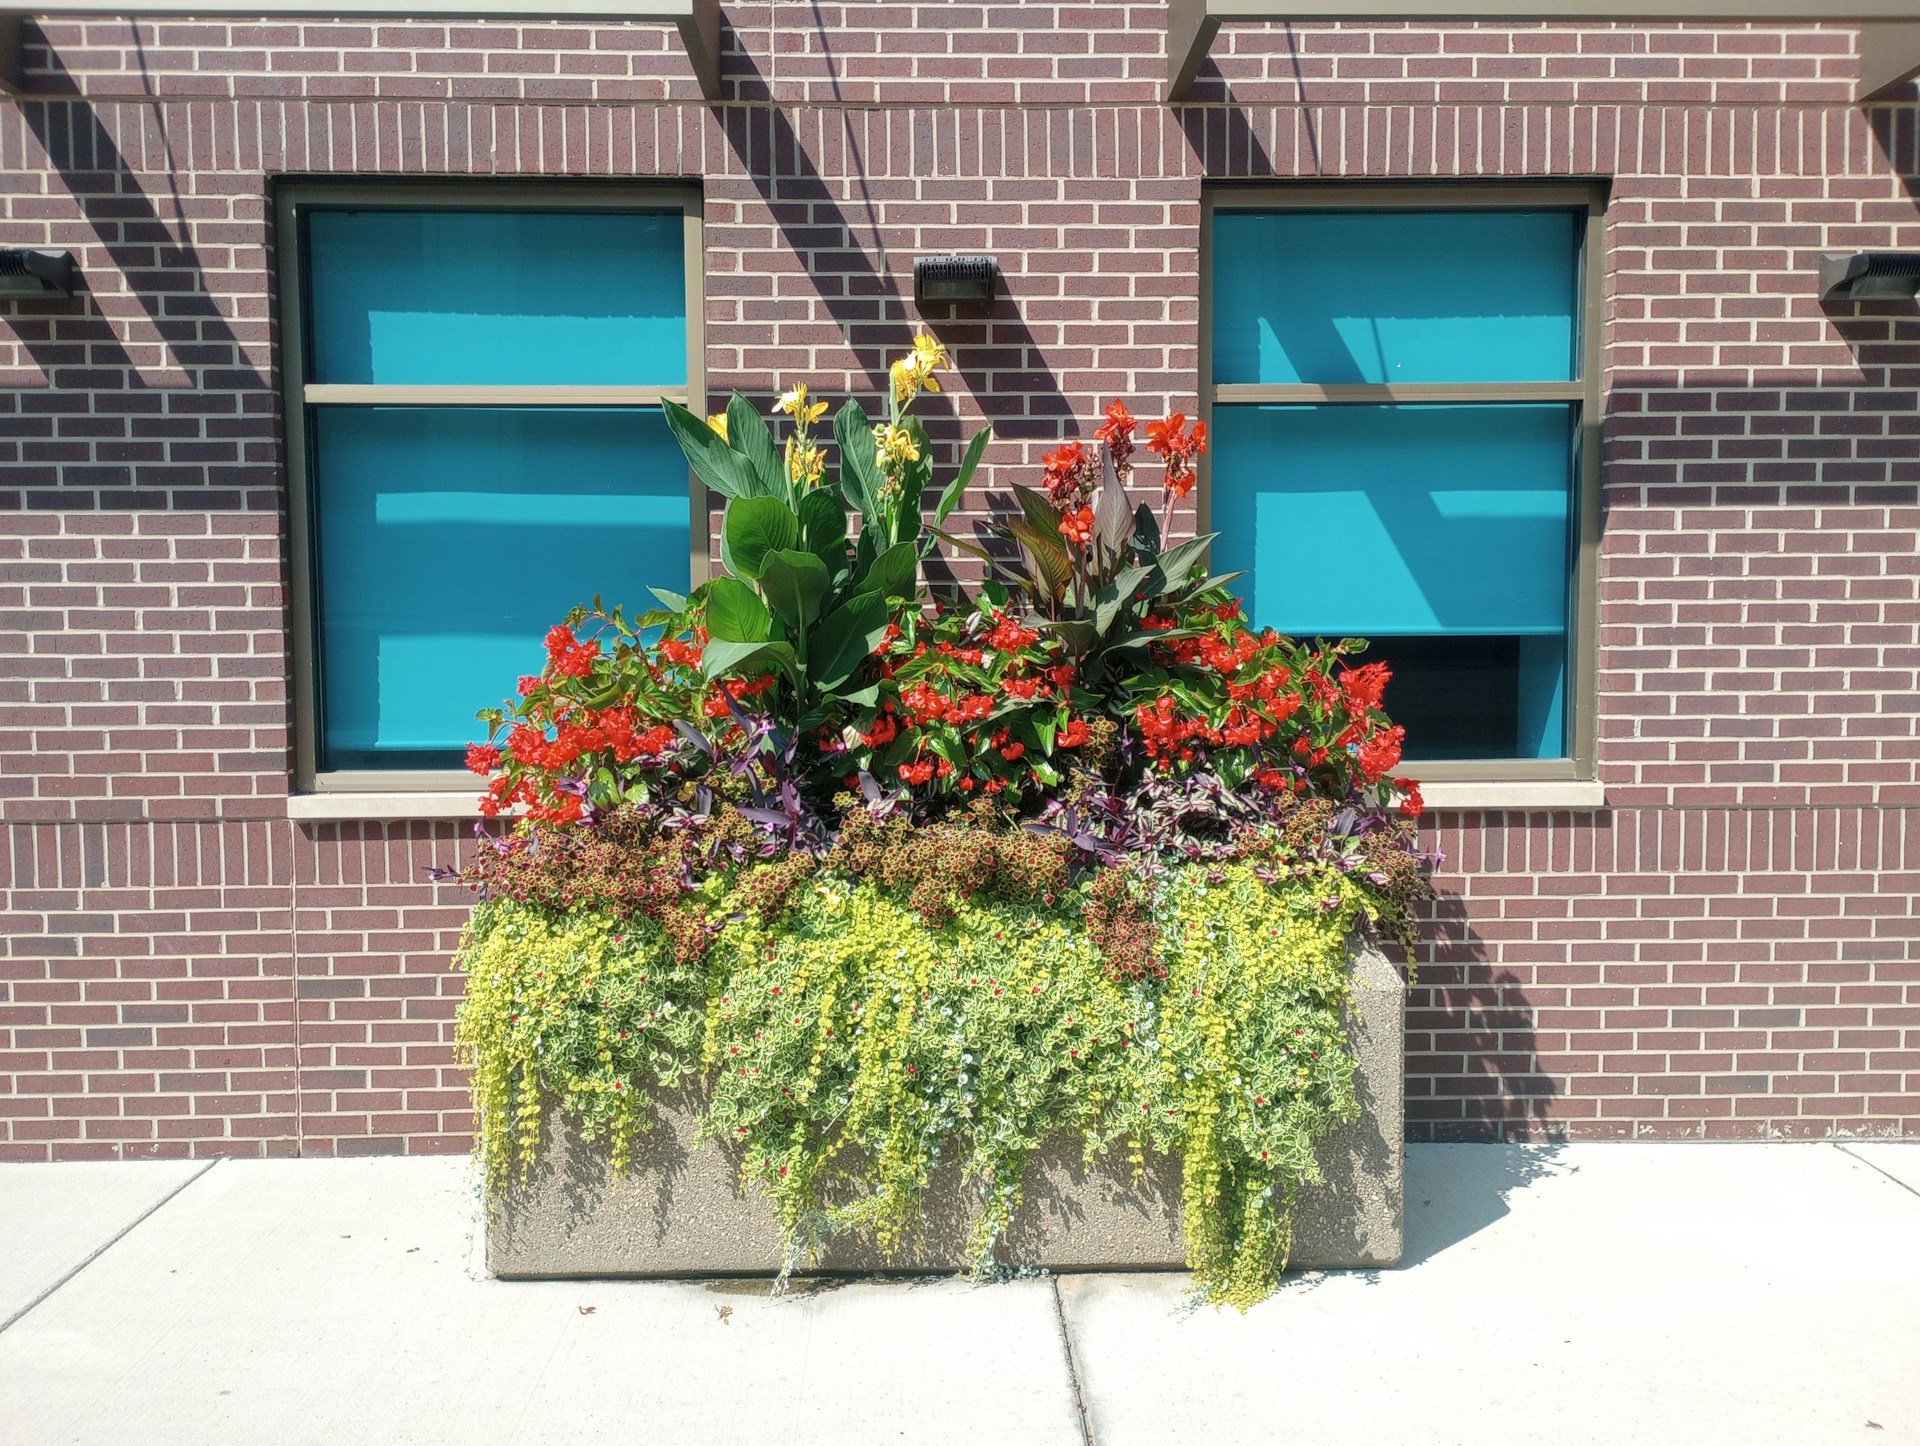 7 Ways To Use Window Box Planters To Enhance Your Home’s Exterior